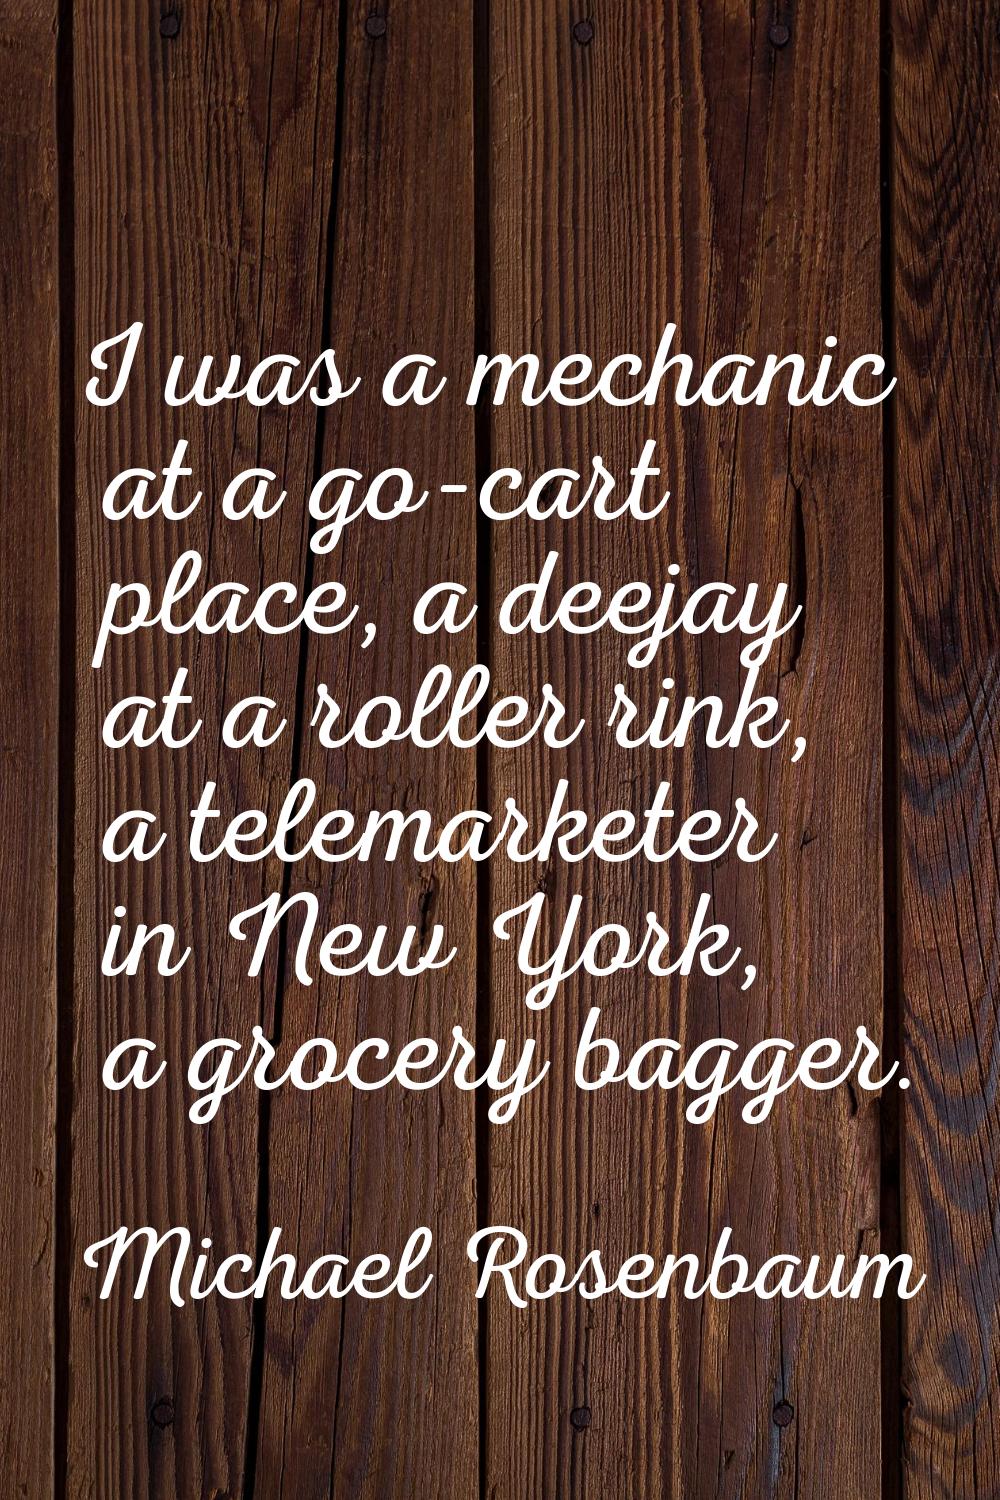 I was a mechanic at a go-cart place, a deejay at a roller rink, a telemarketer in New York, a groce